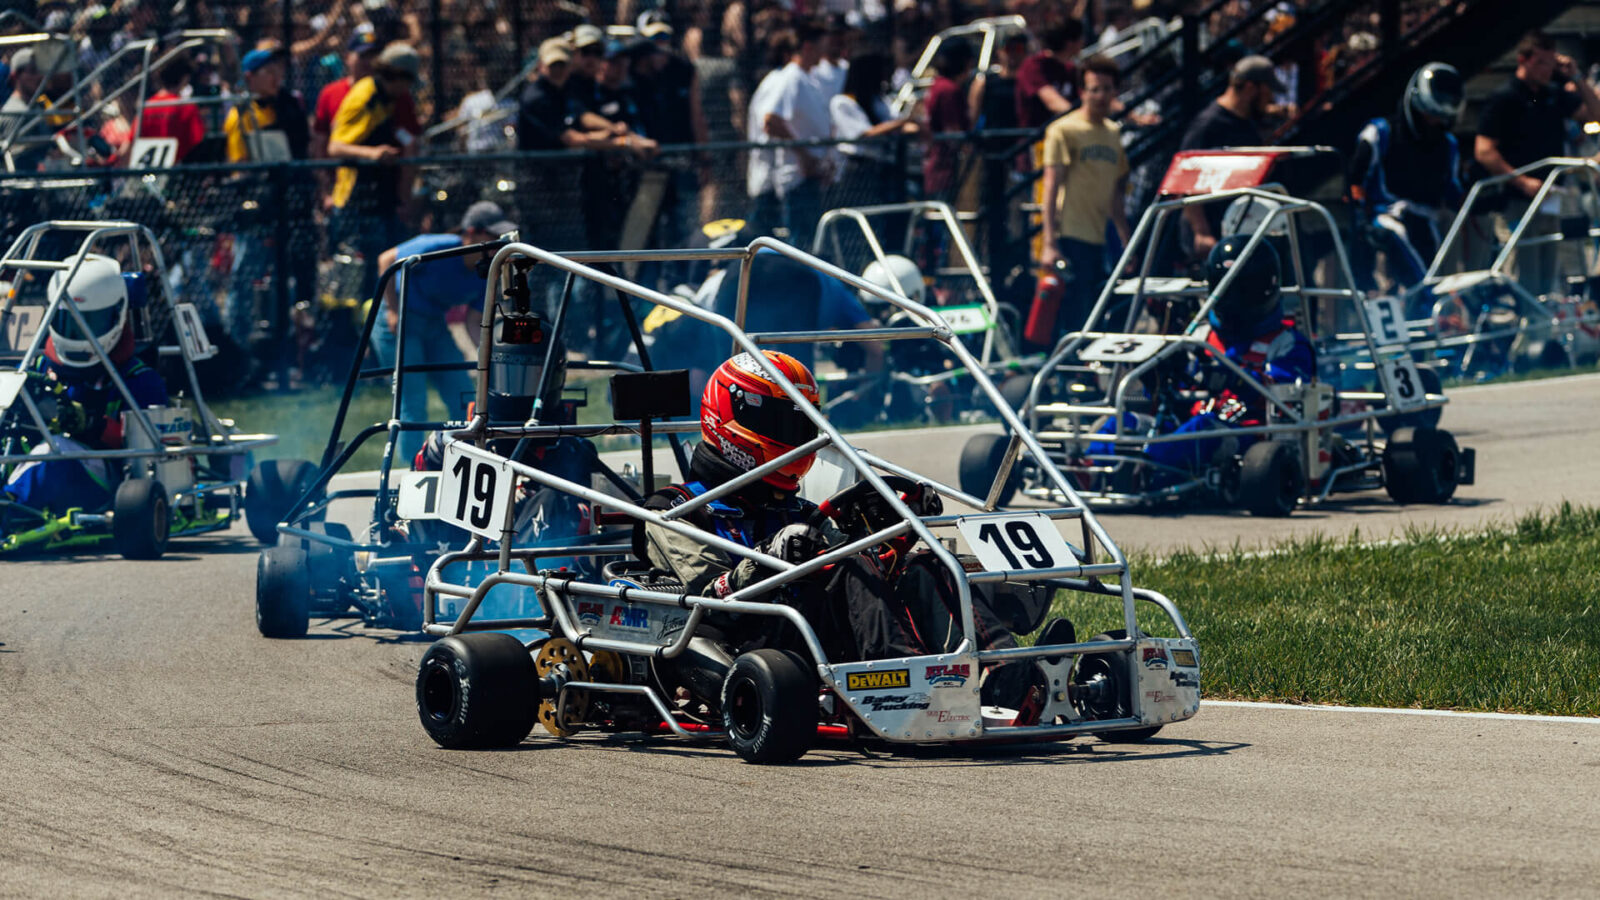 Purdue Grand Prix, the greatest spectacle in college racing